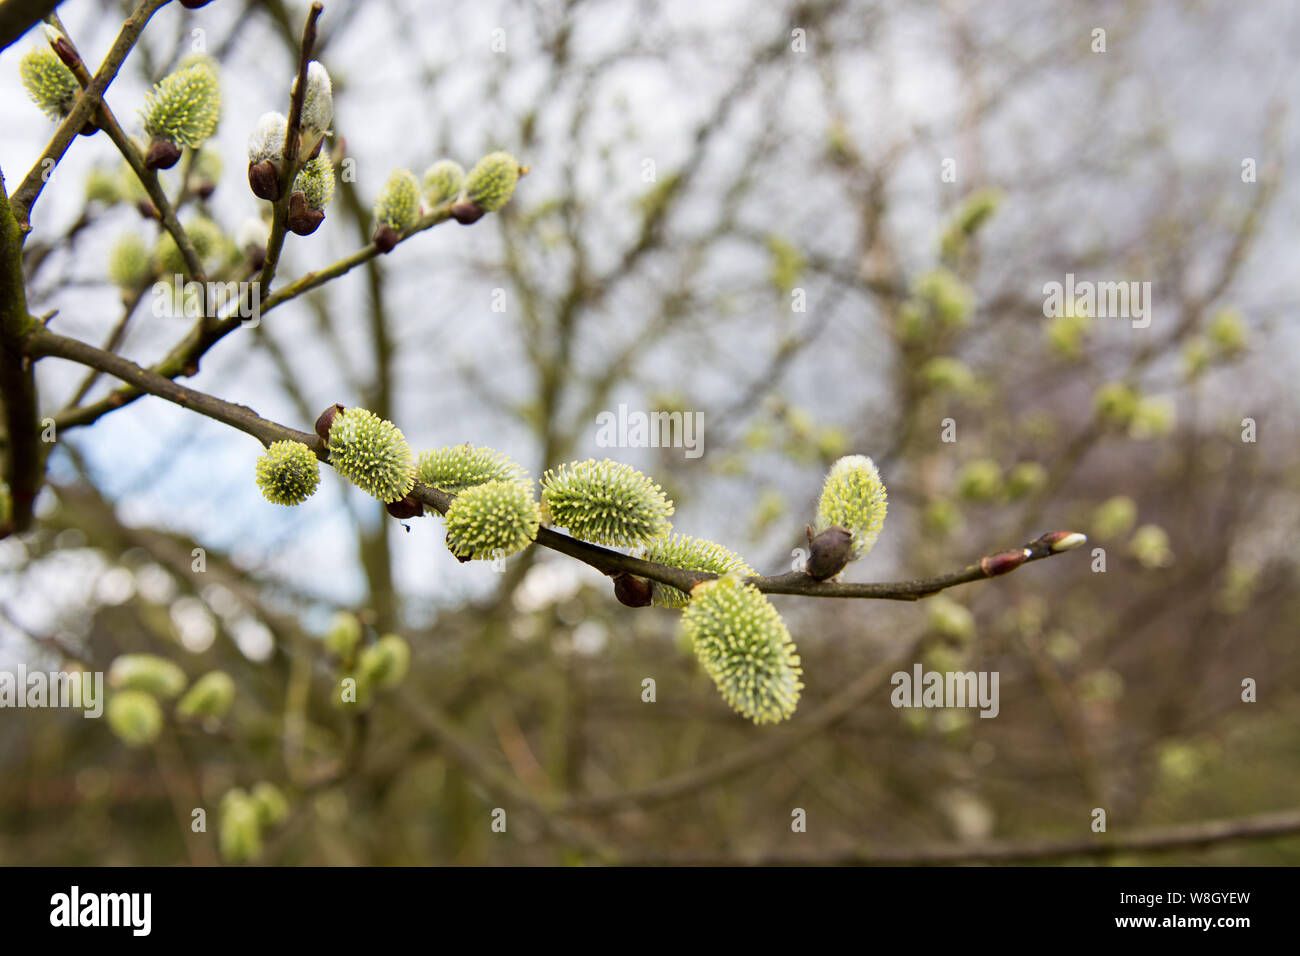 Catkin or ament is a slim, cylindrical flower cluster from a salix tree Stock Photo